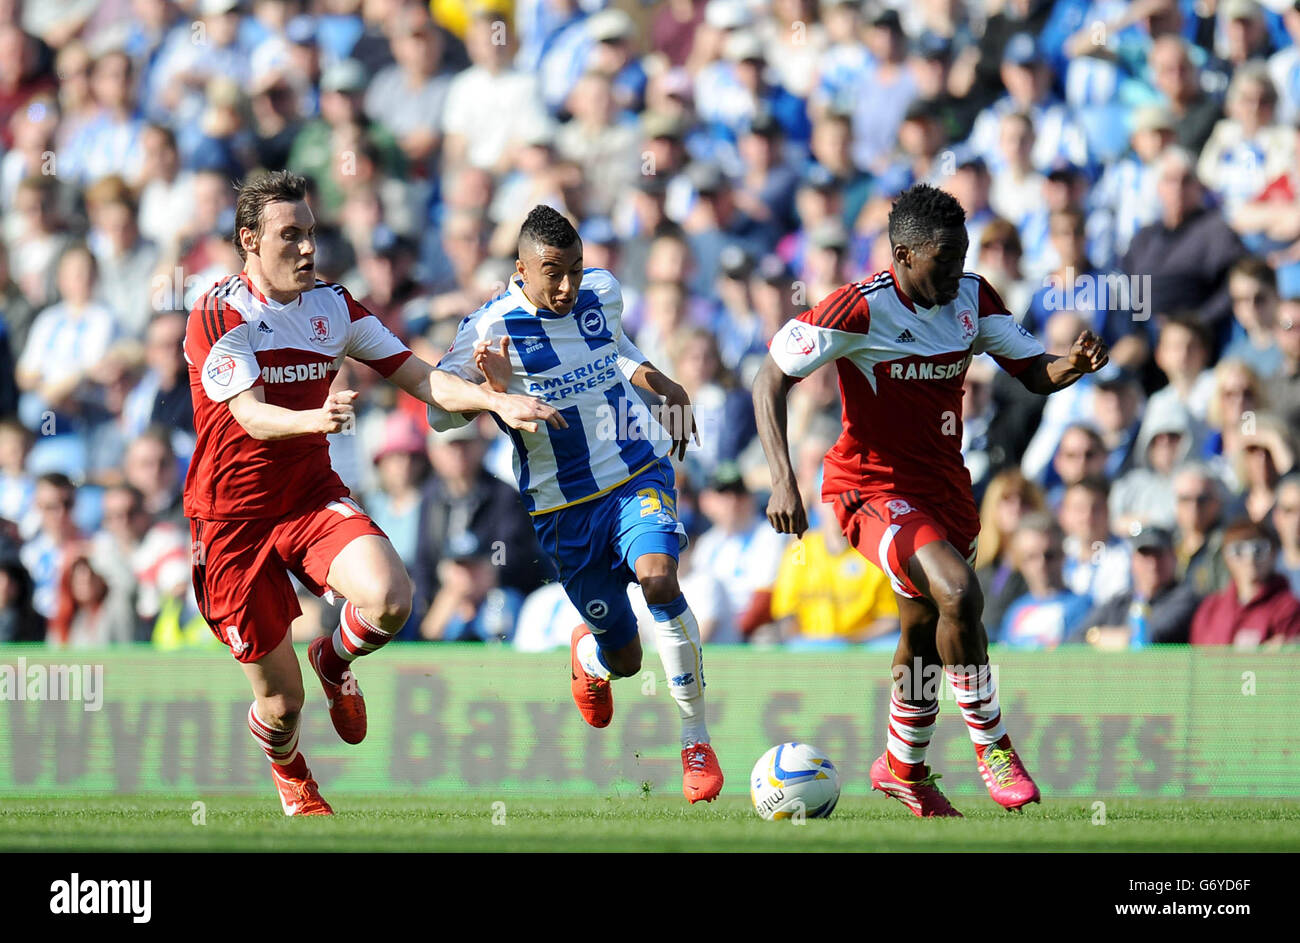 Brighton and Hove Albion's Jesse Lingard (centre) runs between Middlesbrough's Dean Whitehead (left) and Kenneth Omeruo (right) during the Sky Bet League Championship match at the AMEX Stadium, Brighton. Stock Photo